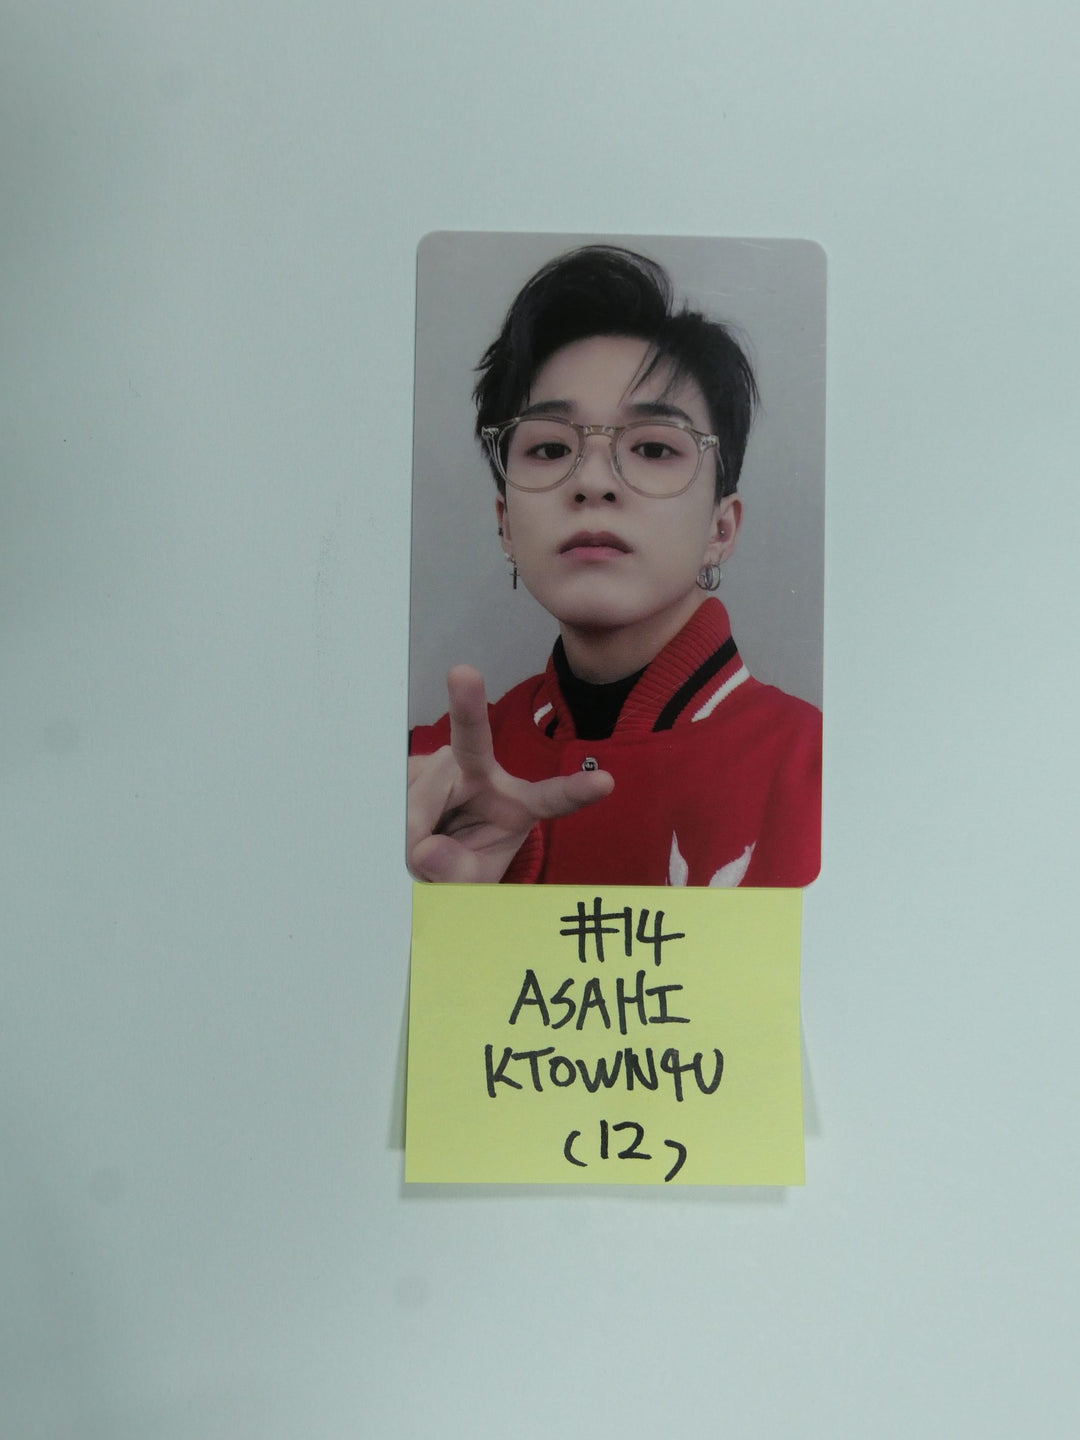 Treasure 'THE SECOND STEP : CHAPTER ONE' - Ktown4U Luckydraw Event PVC Photocard